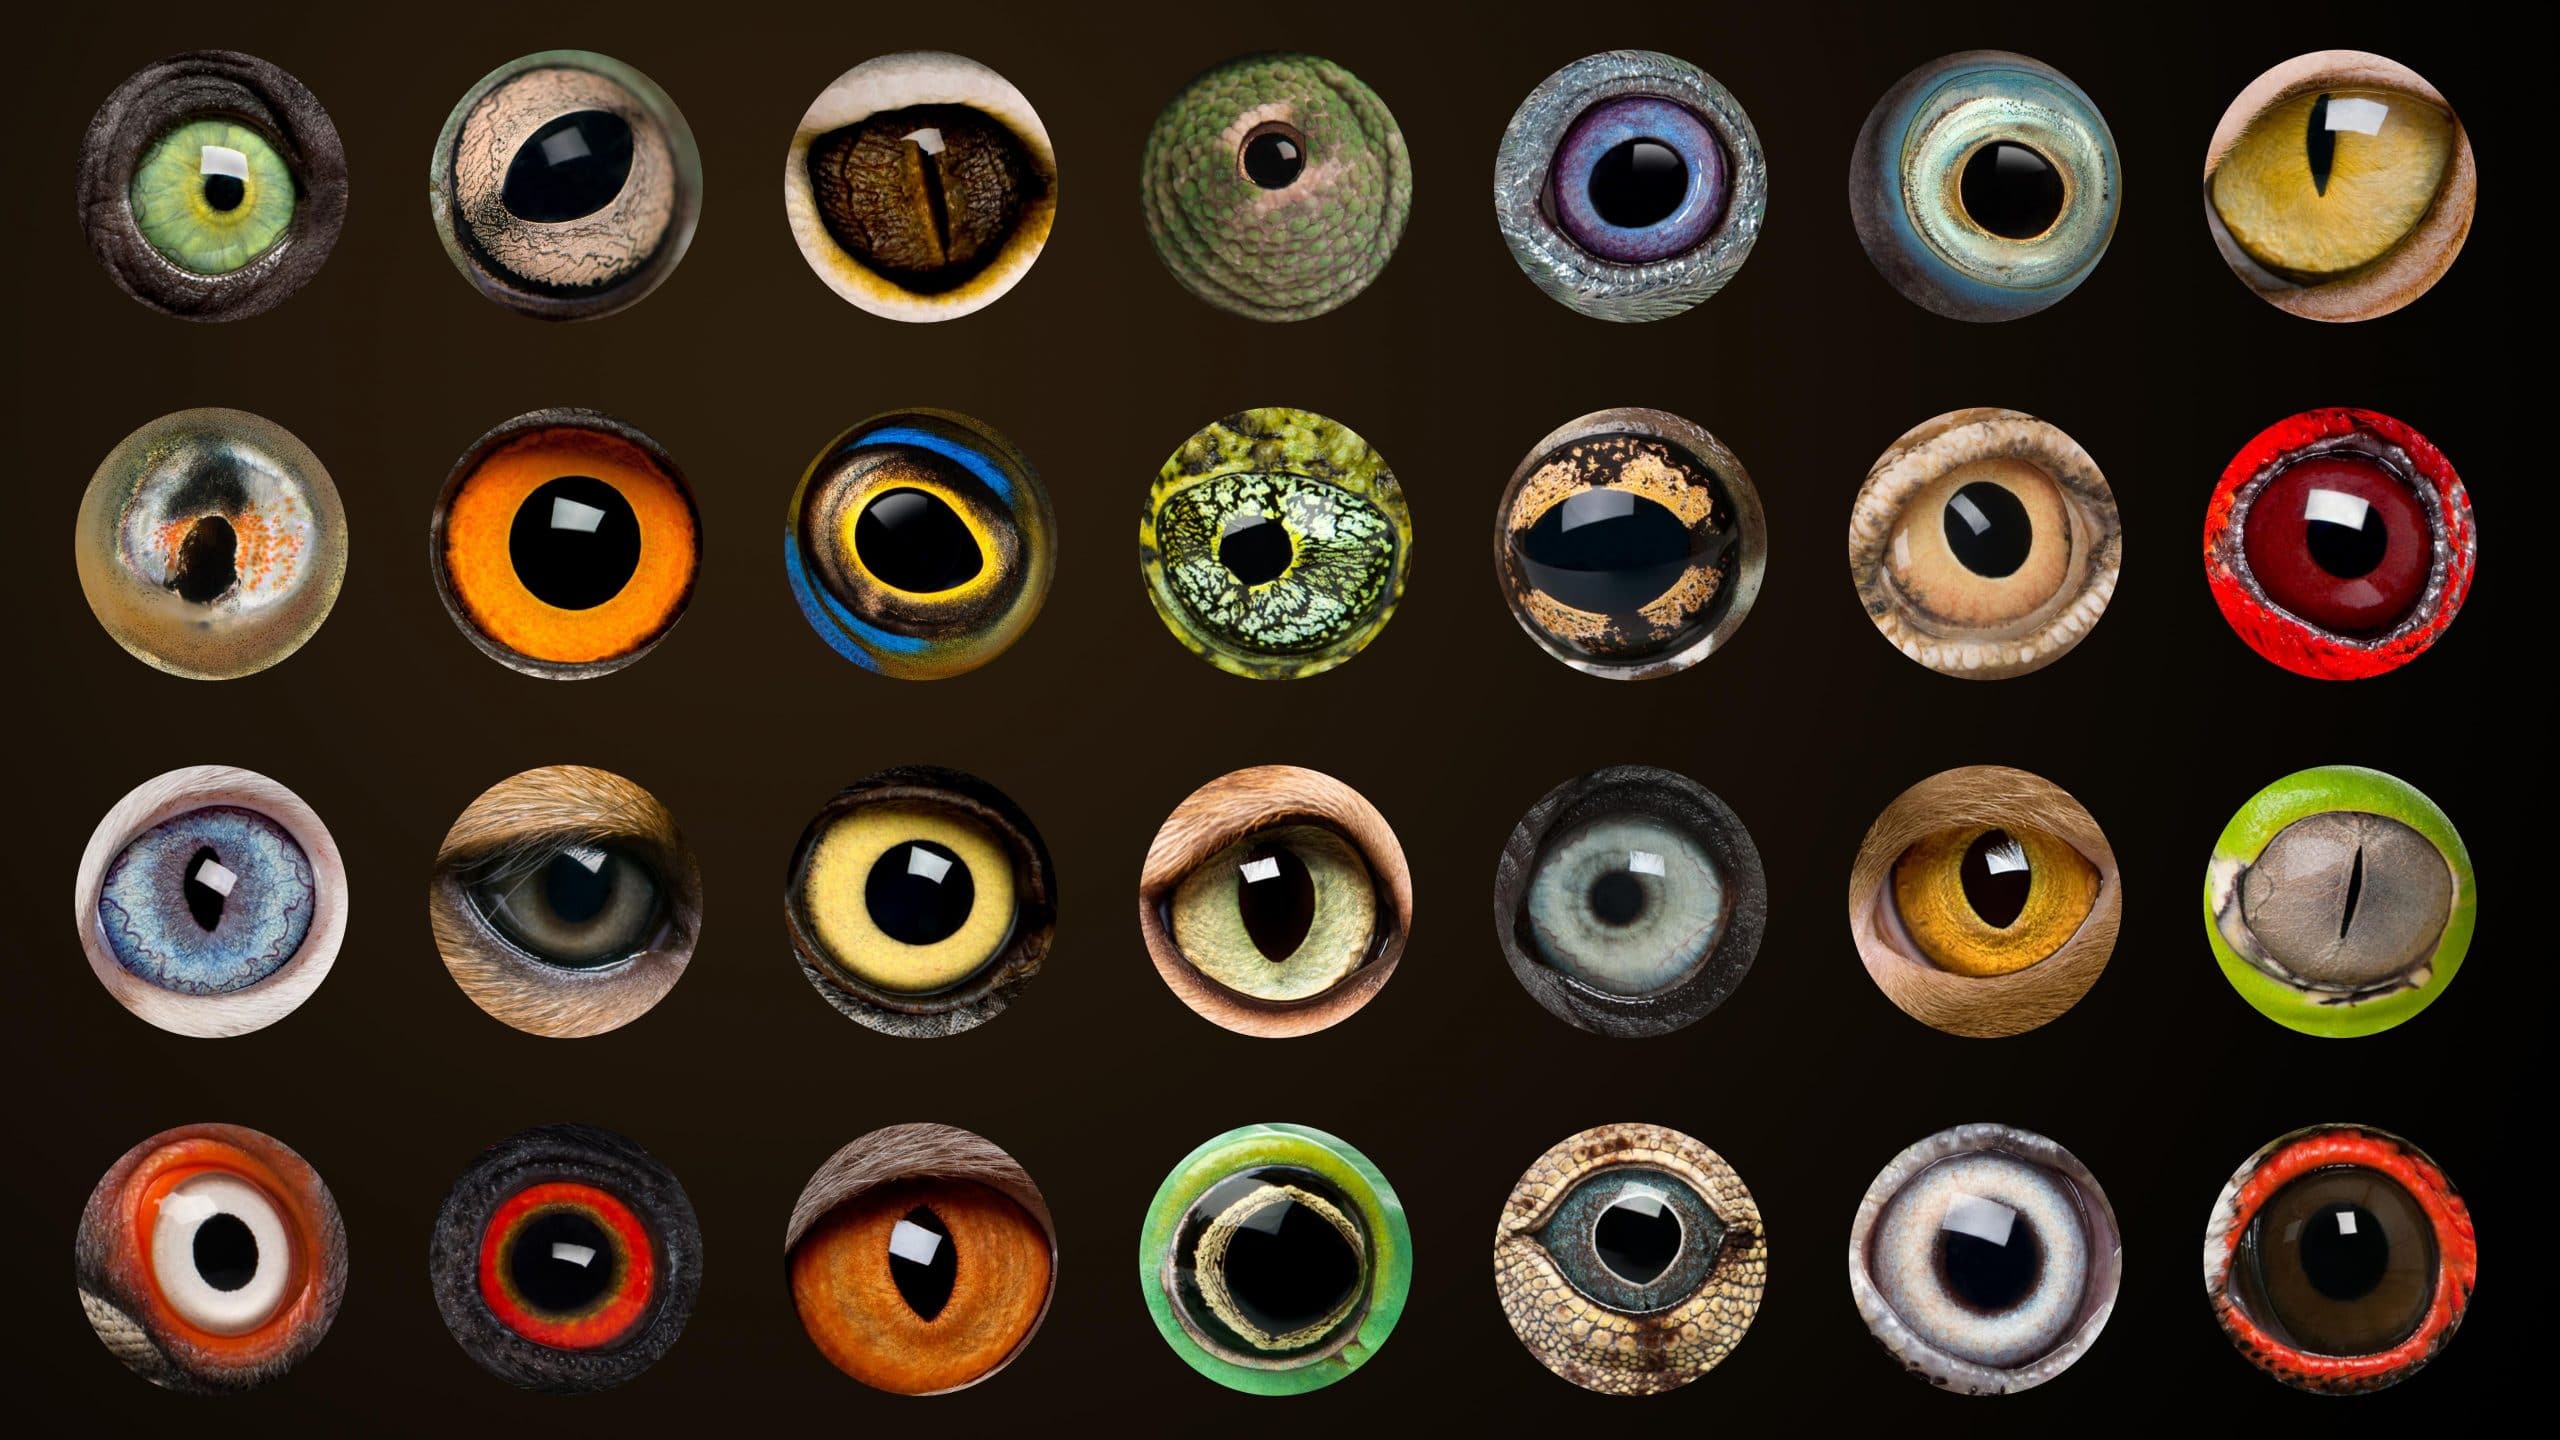 Composition of Animal eyes